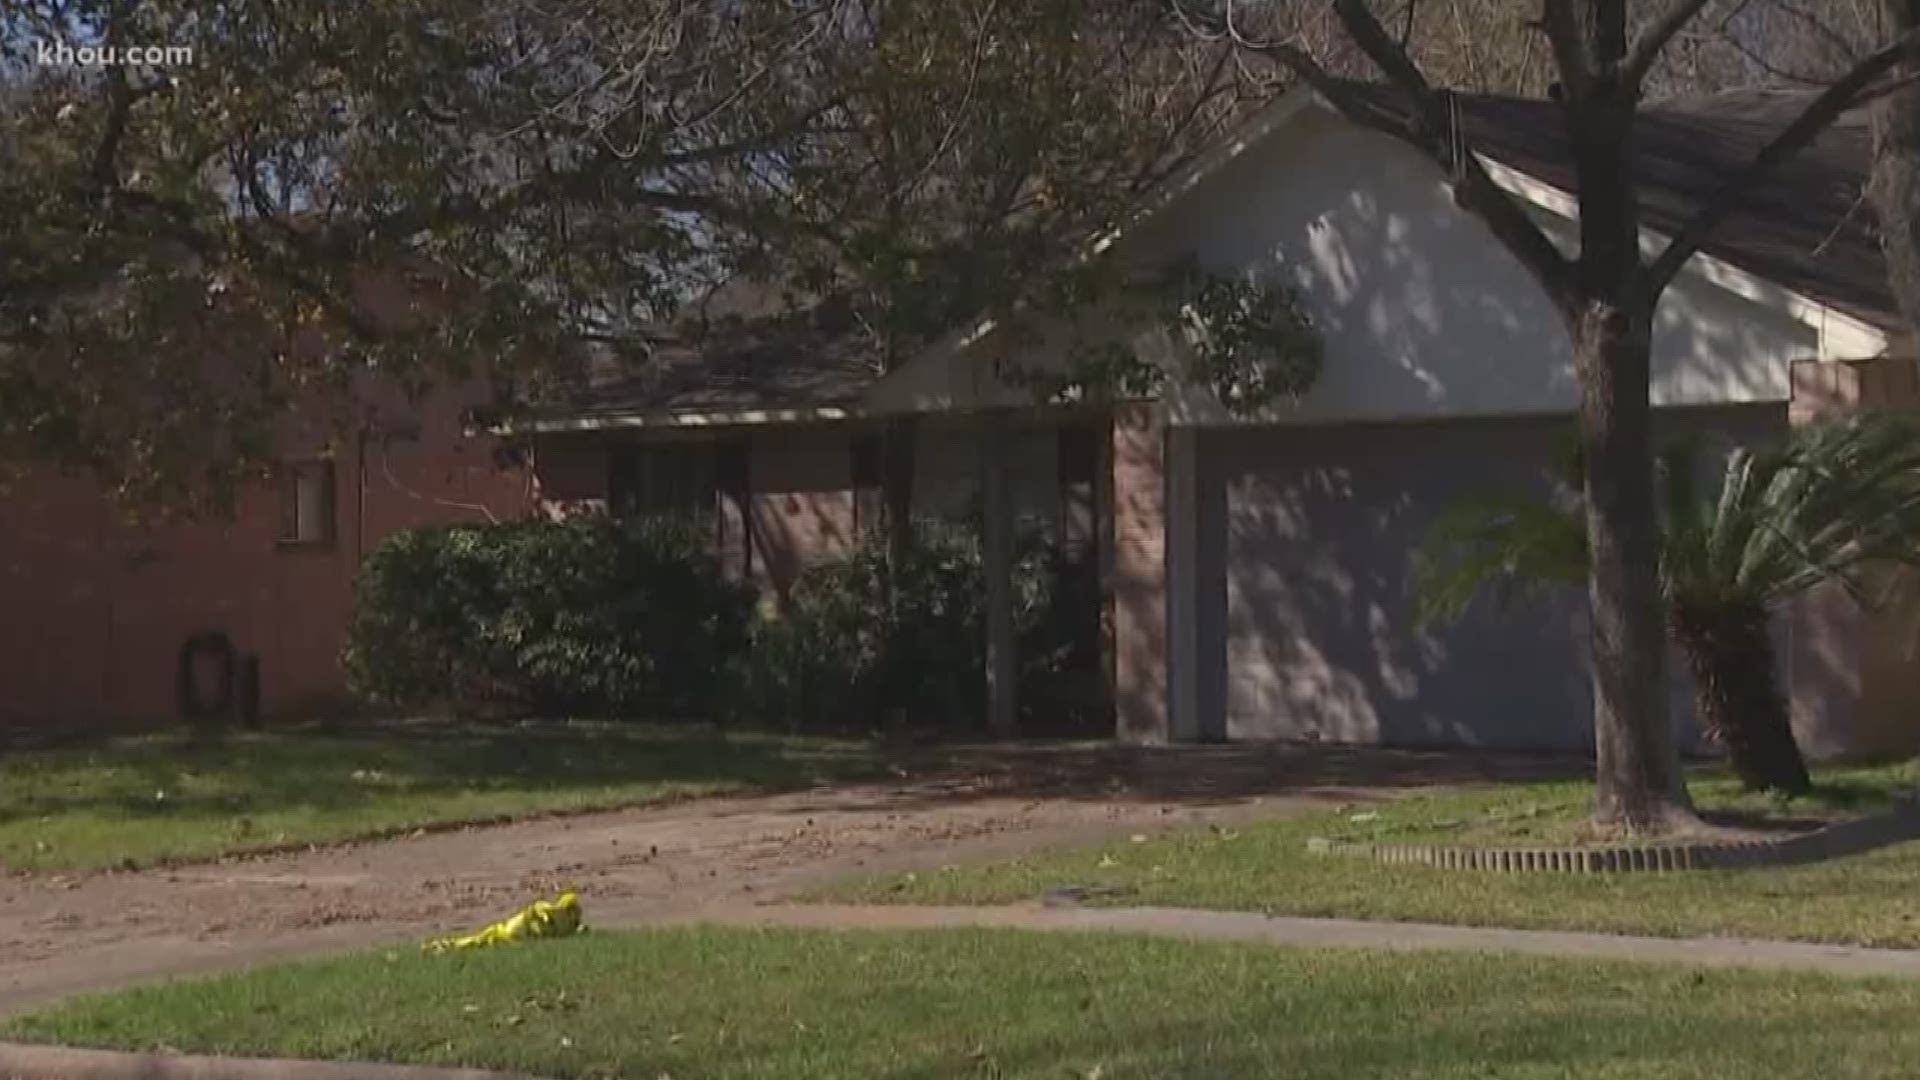 The 3-month-old baby was in the home with his grandma and four other kids when he died.